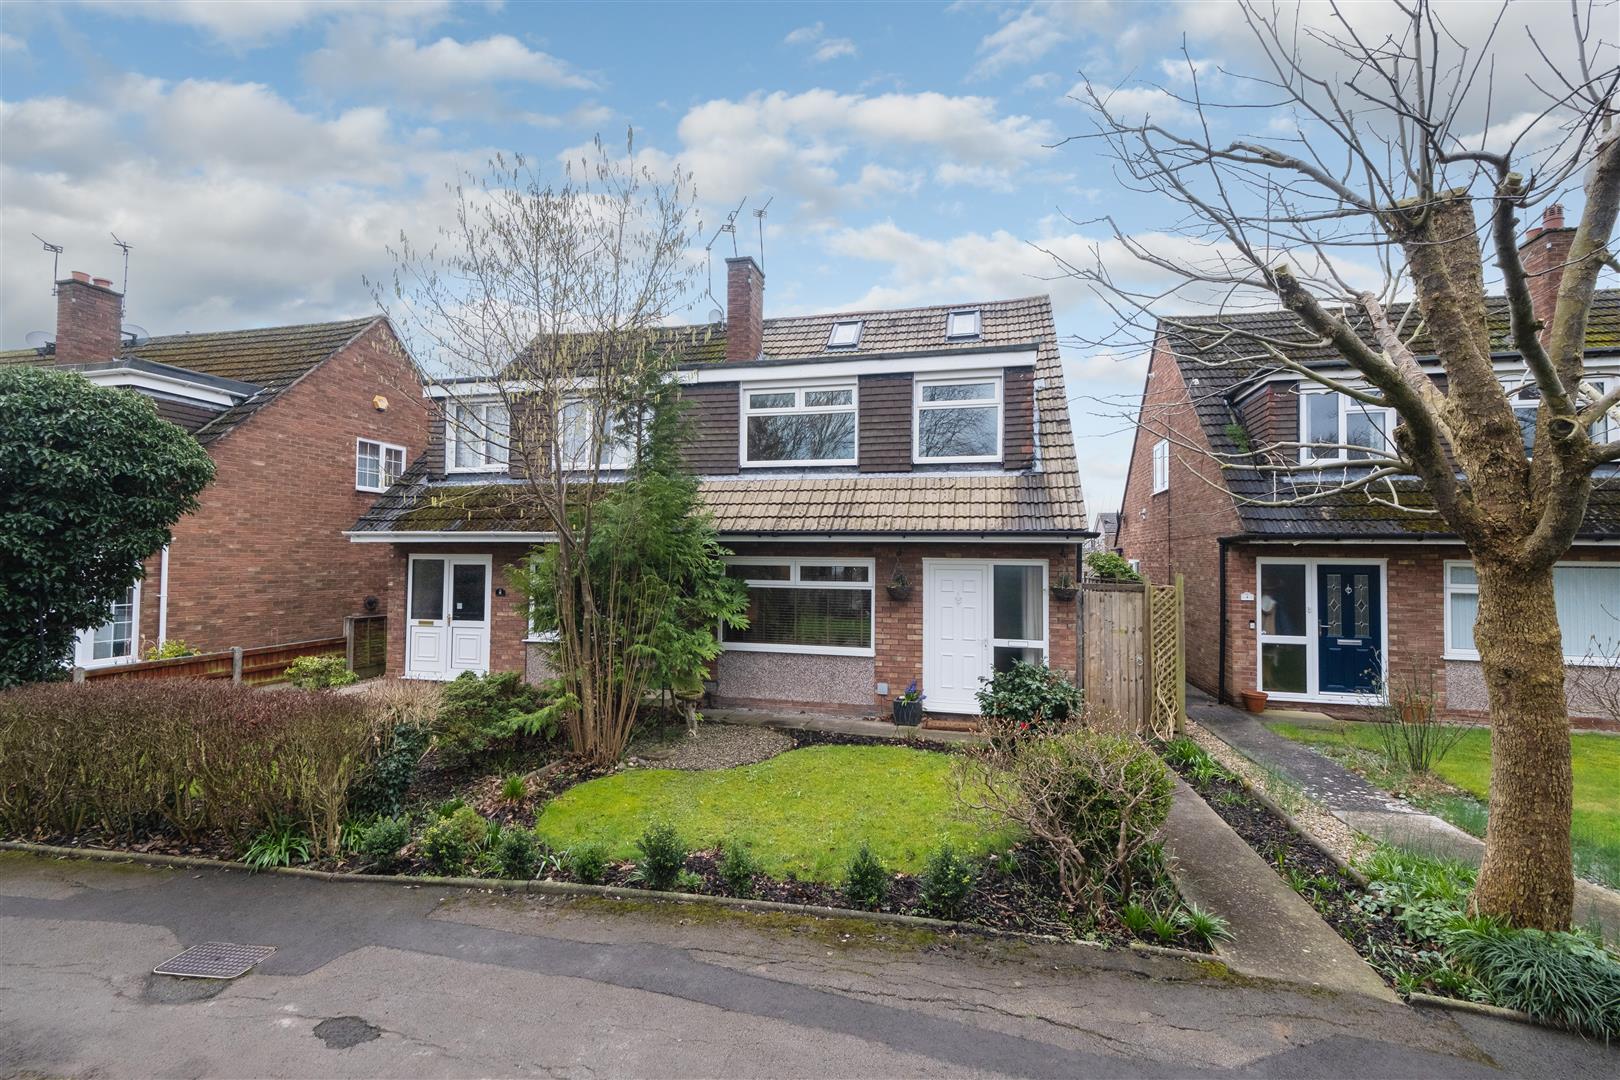 3 bedroom  House for Sale in Northwich